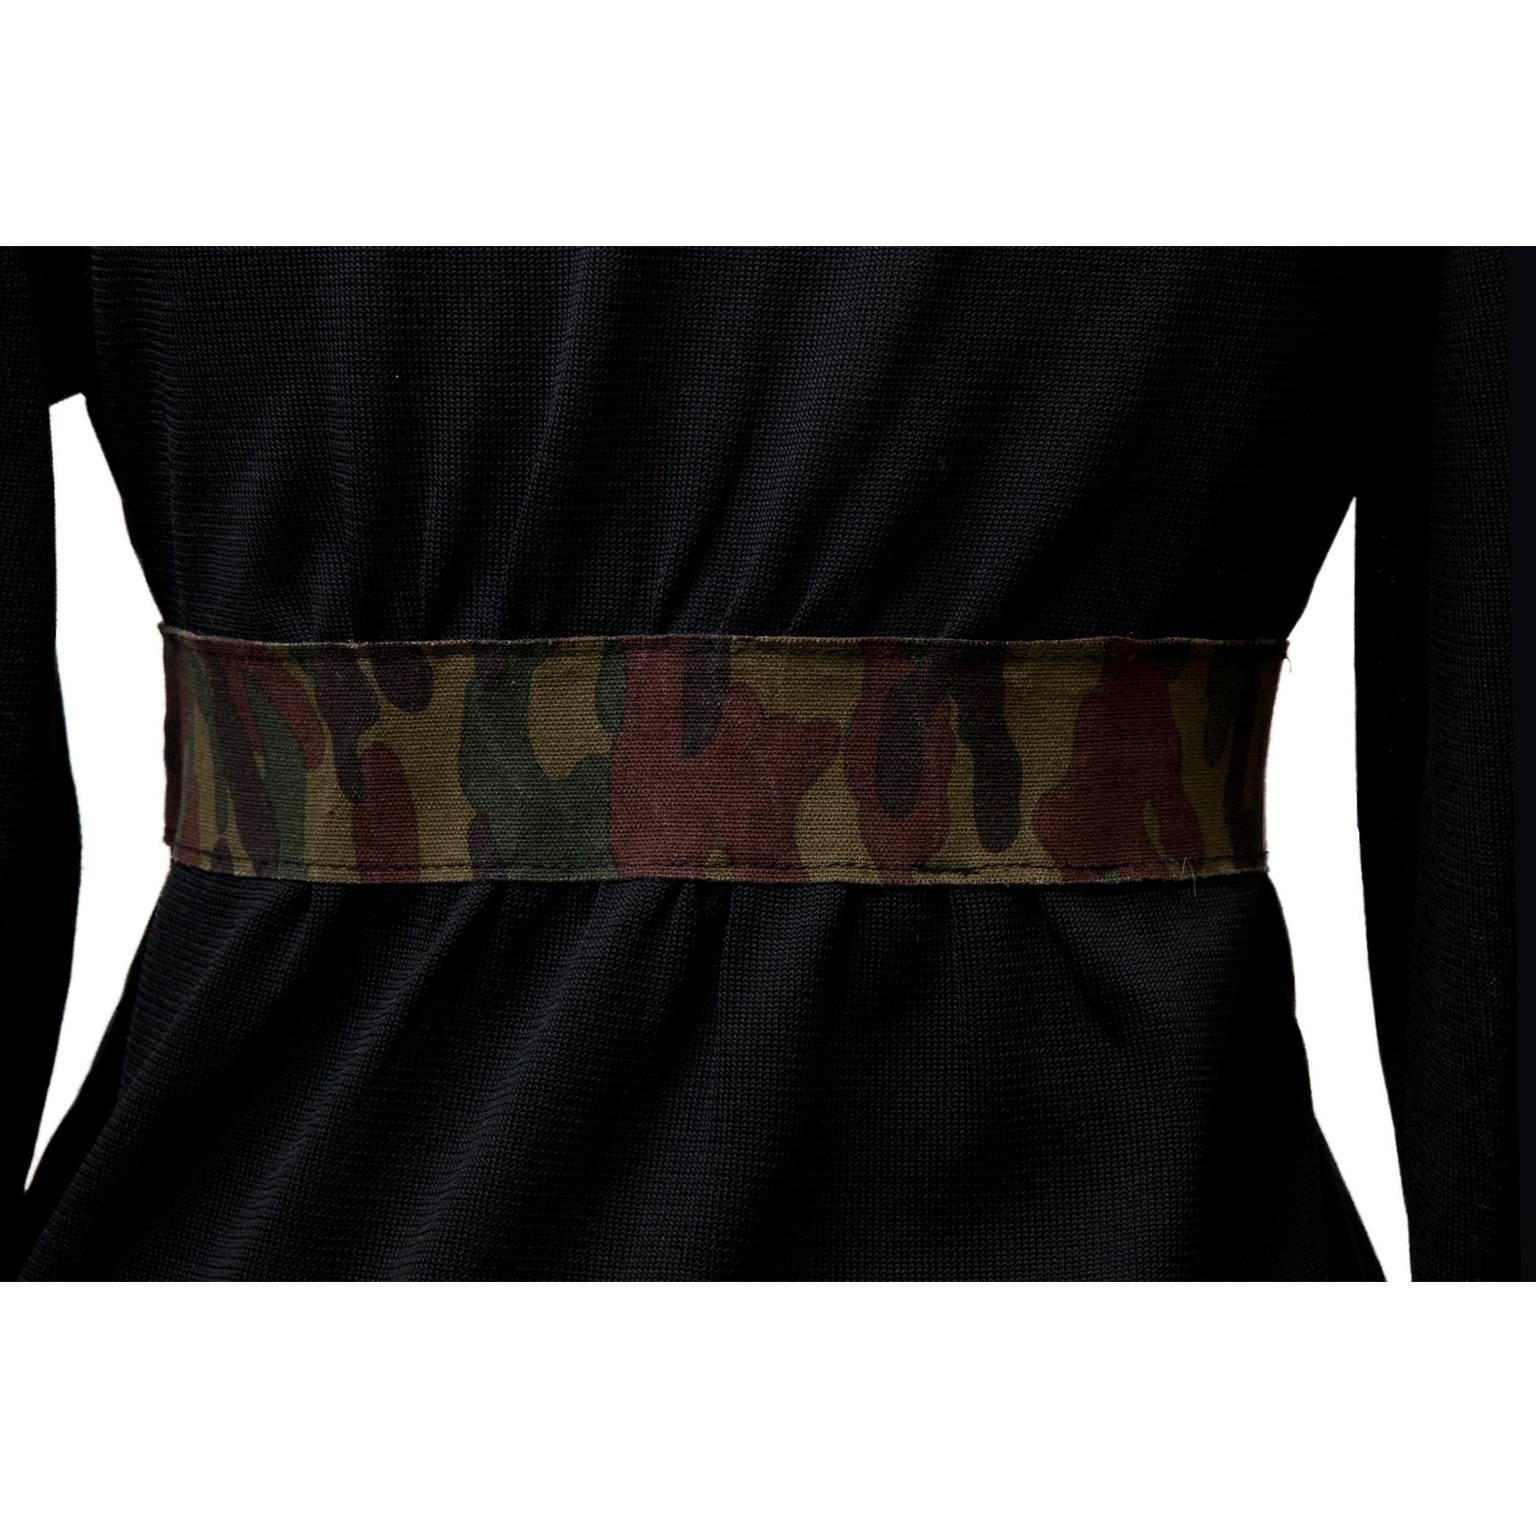 Comme des Garcons Camouflage Tape Black Top AD 2001 In Good Condition For Sale In Berlin, DE